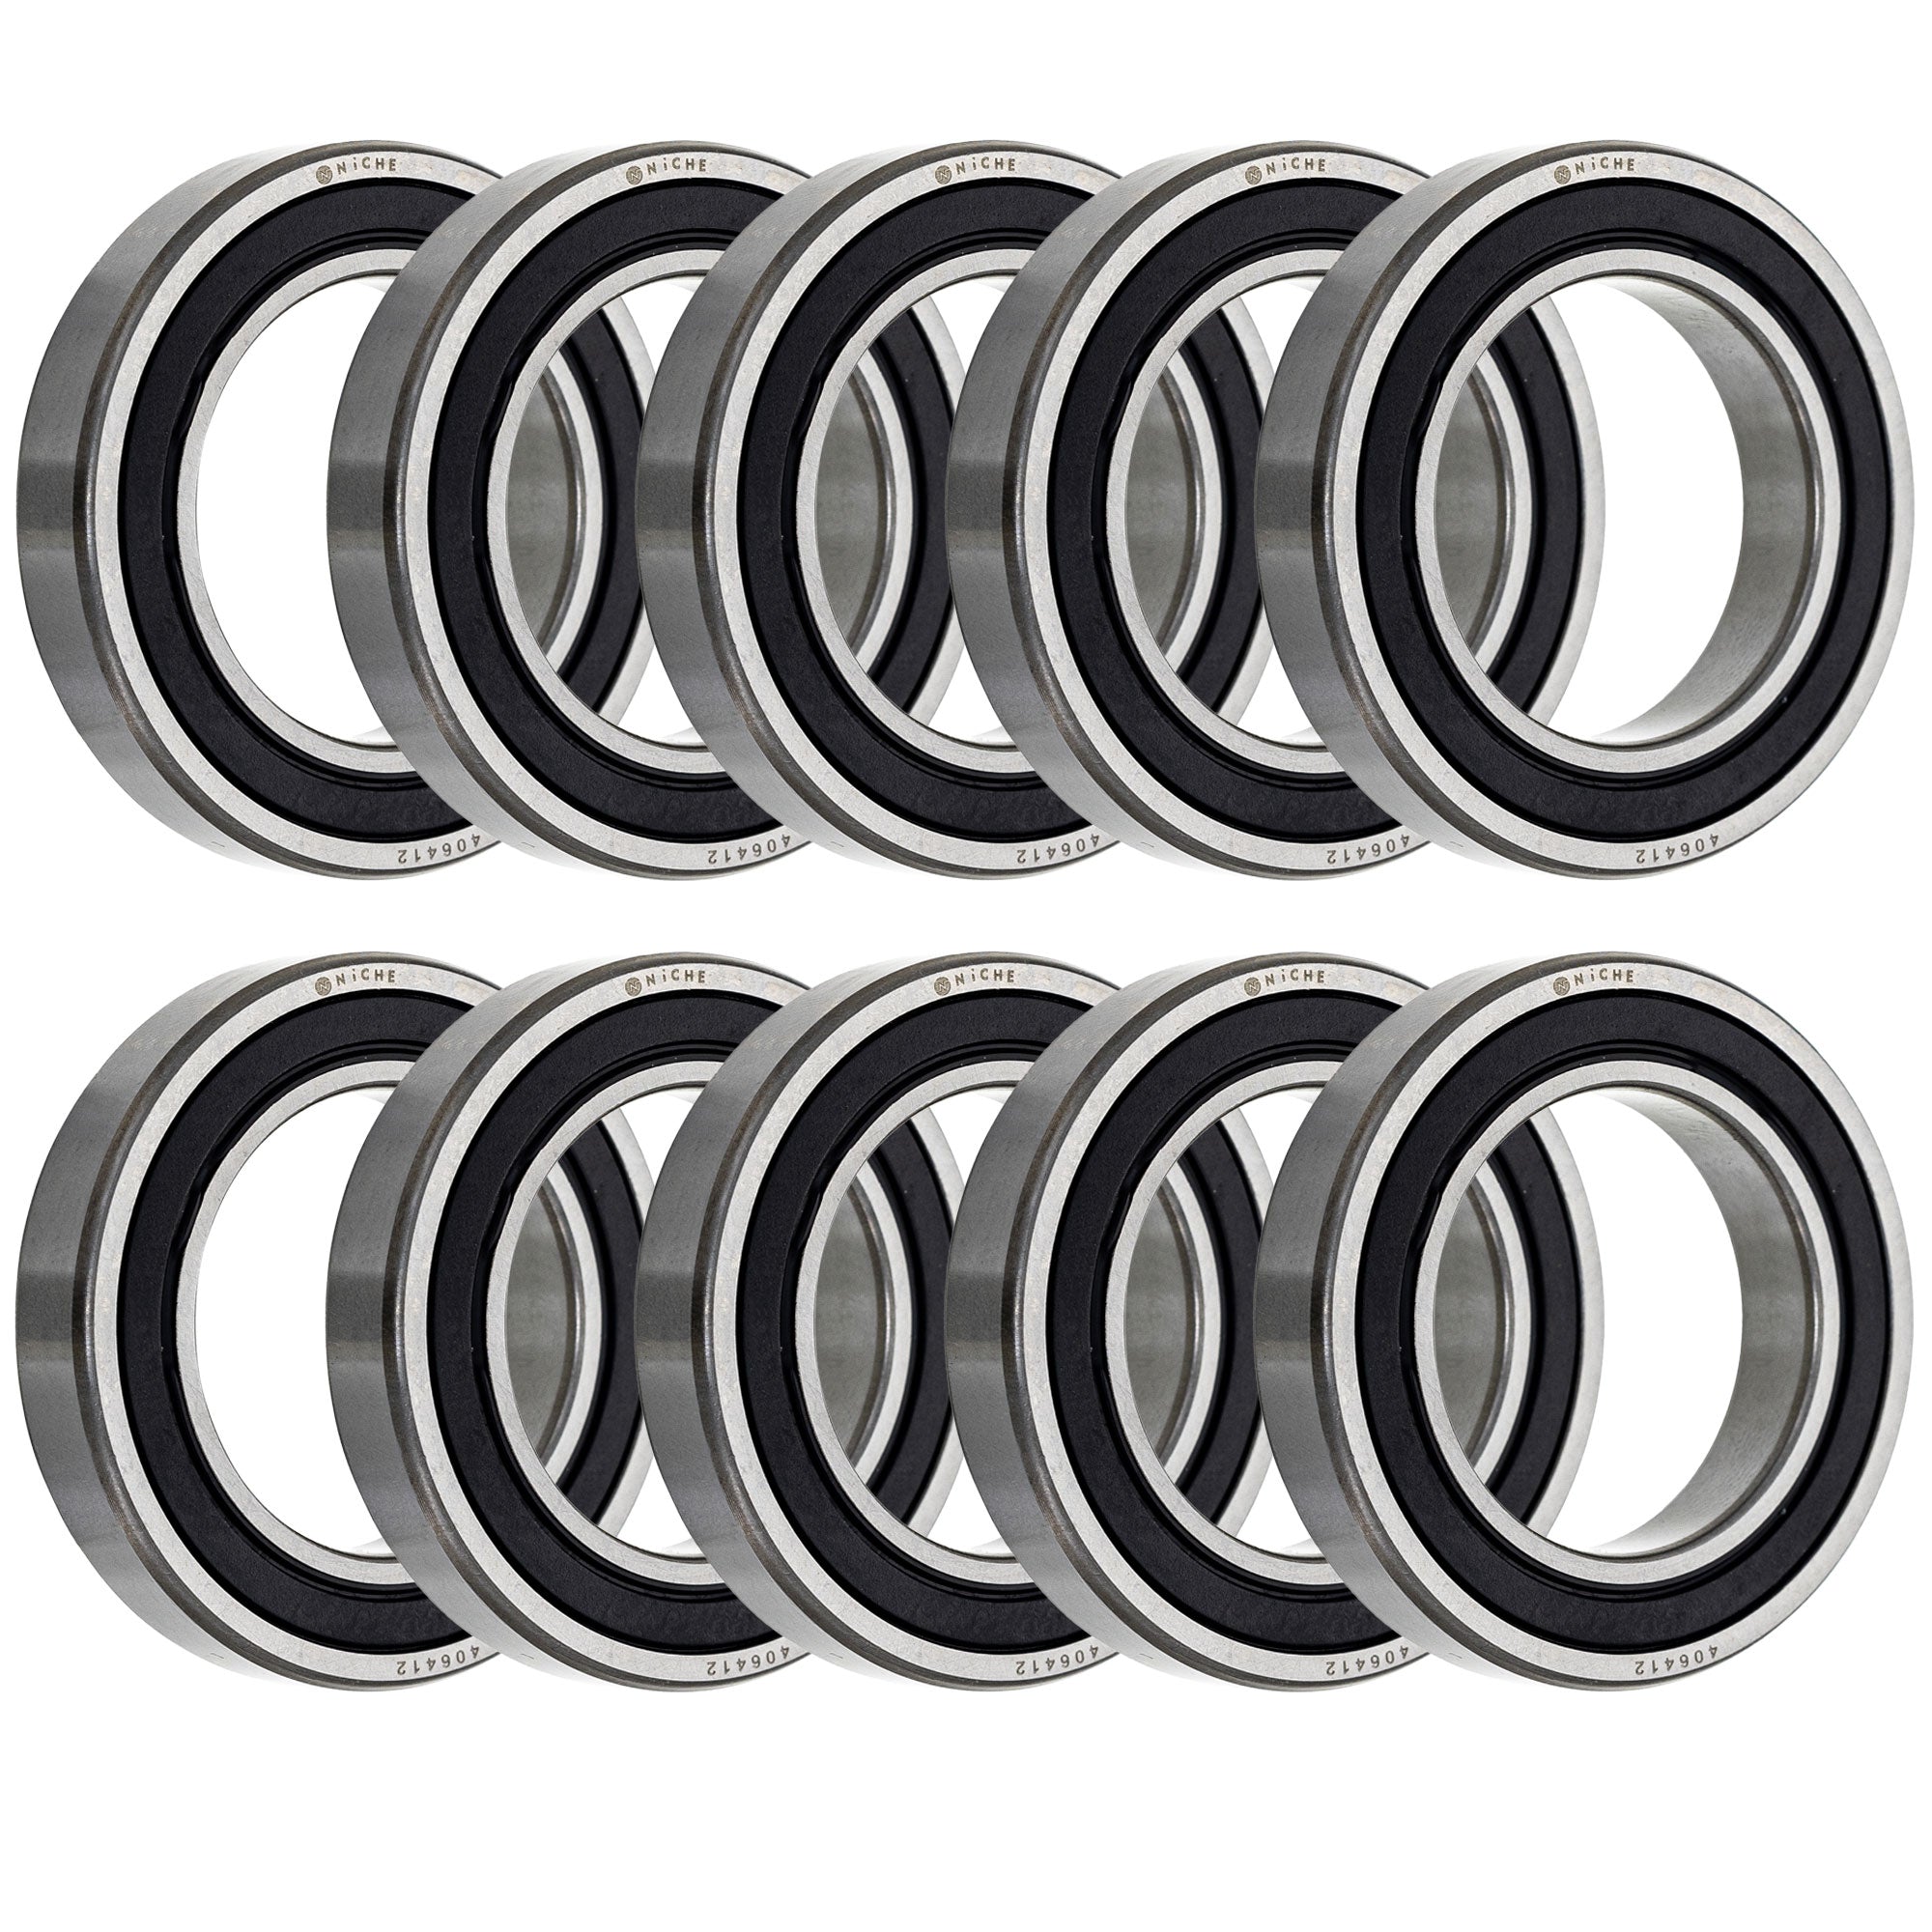 Single Row, Deep Groove, Ball Bearing Pack of 10 10-Pack for zOTHER YFZ450 Raptor NICHE 519-CBB2262R